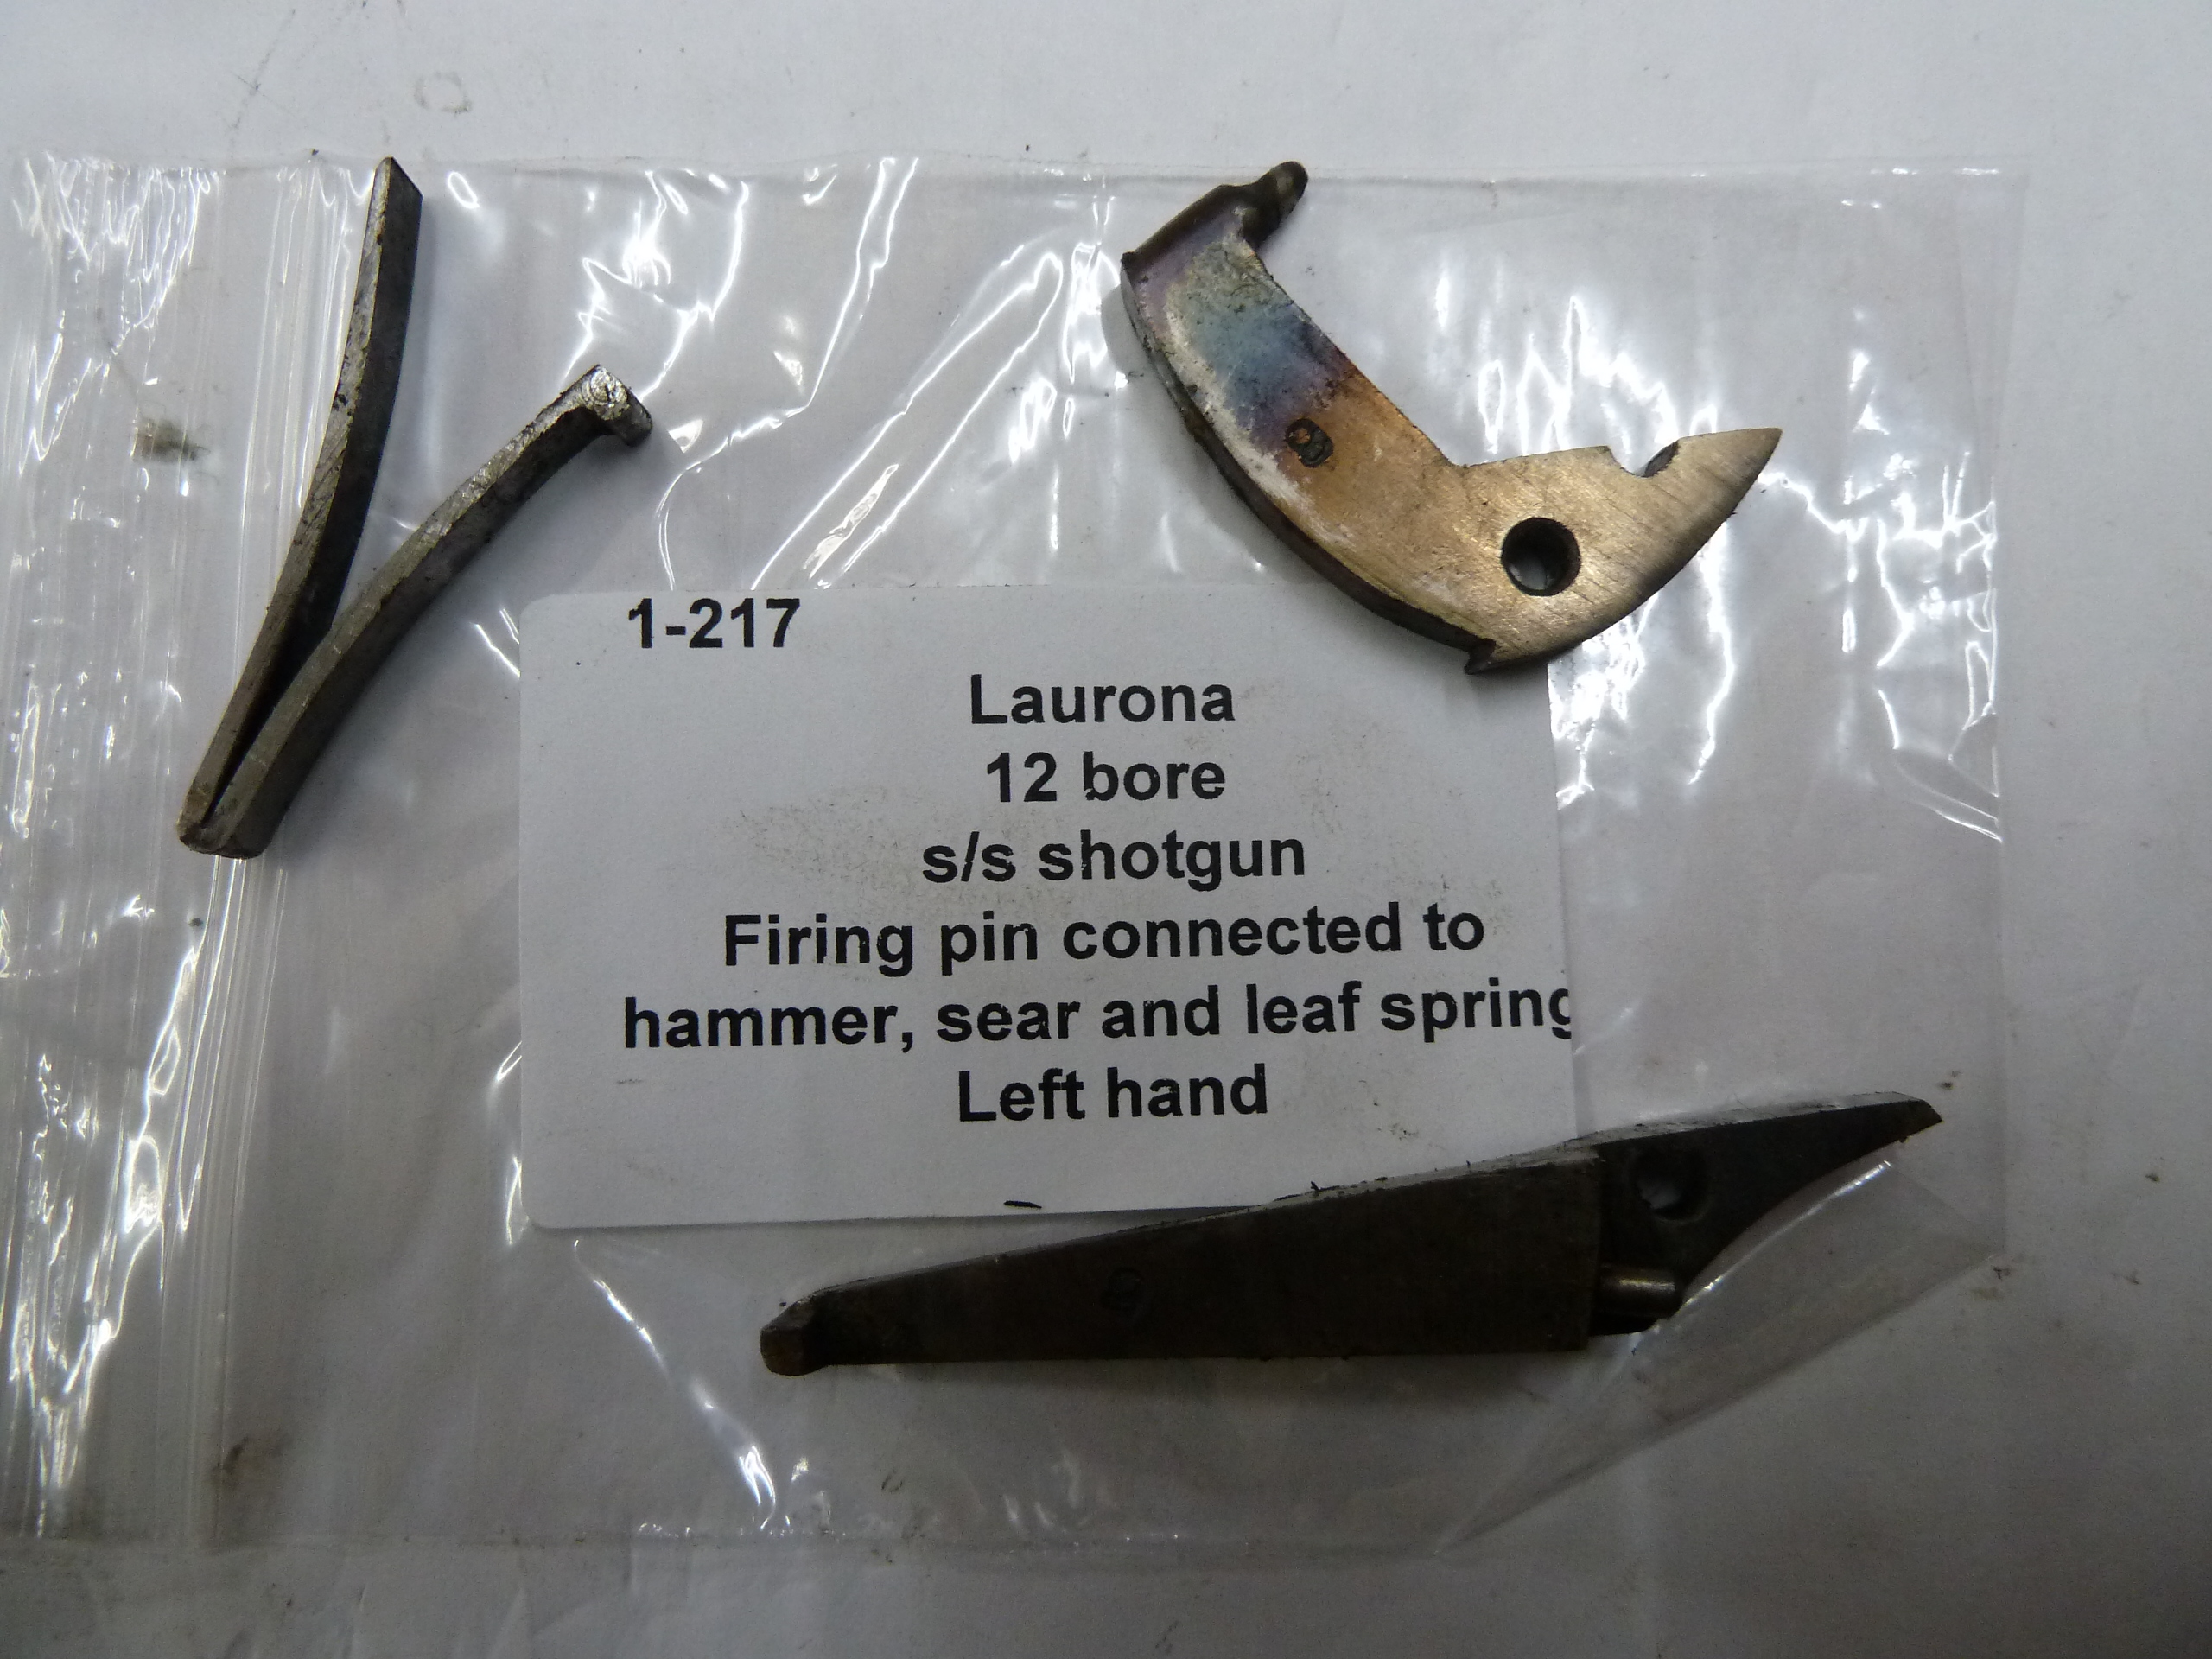 Laurona firing pin connevted to hammer left hand